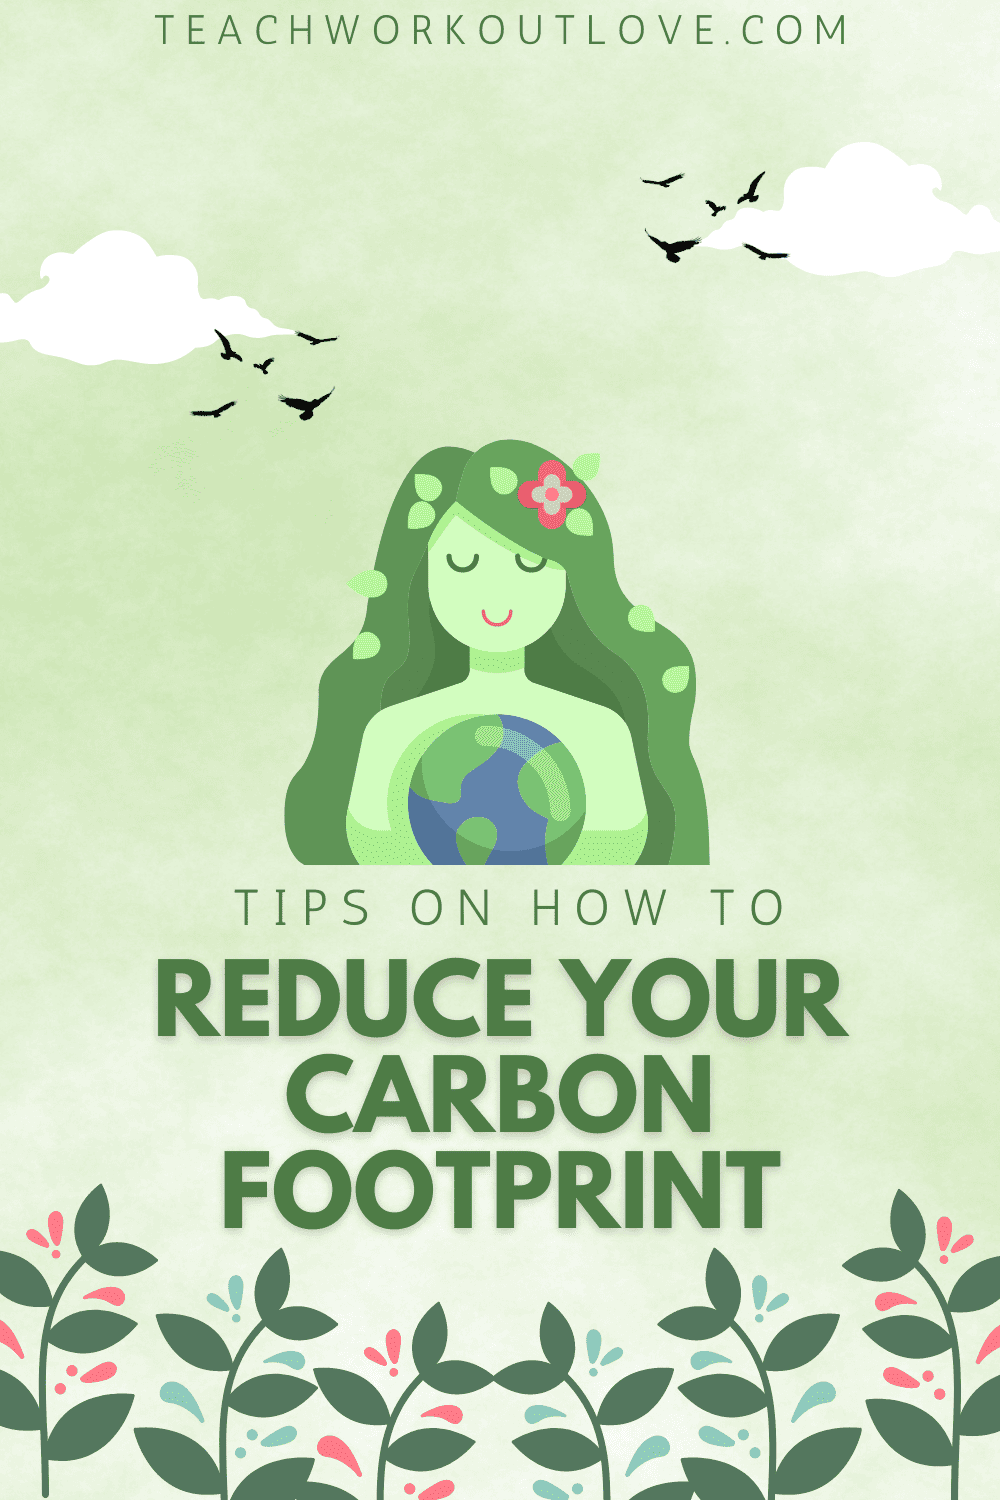 Here are some simple yet impactful steps you can take to reduce your carbon footprint and be kinder to the planet: